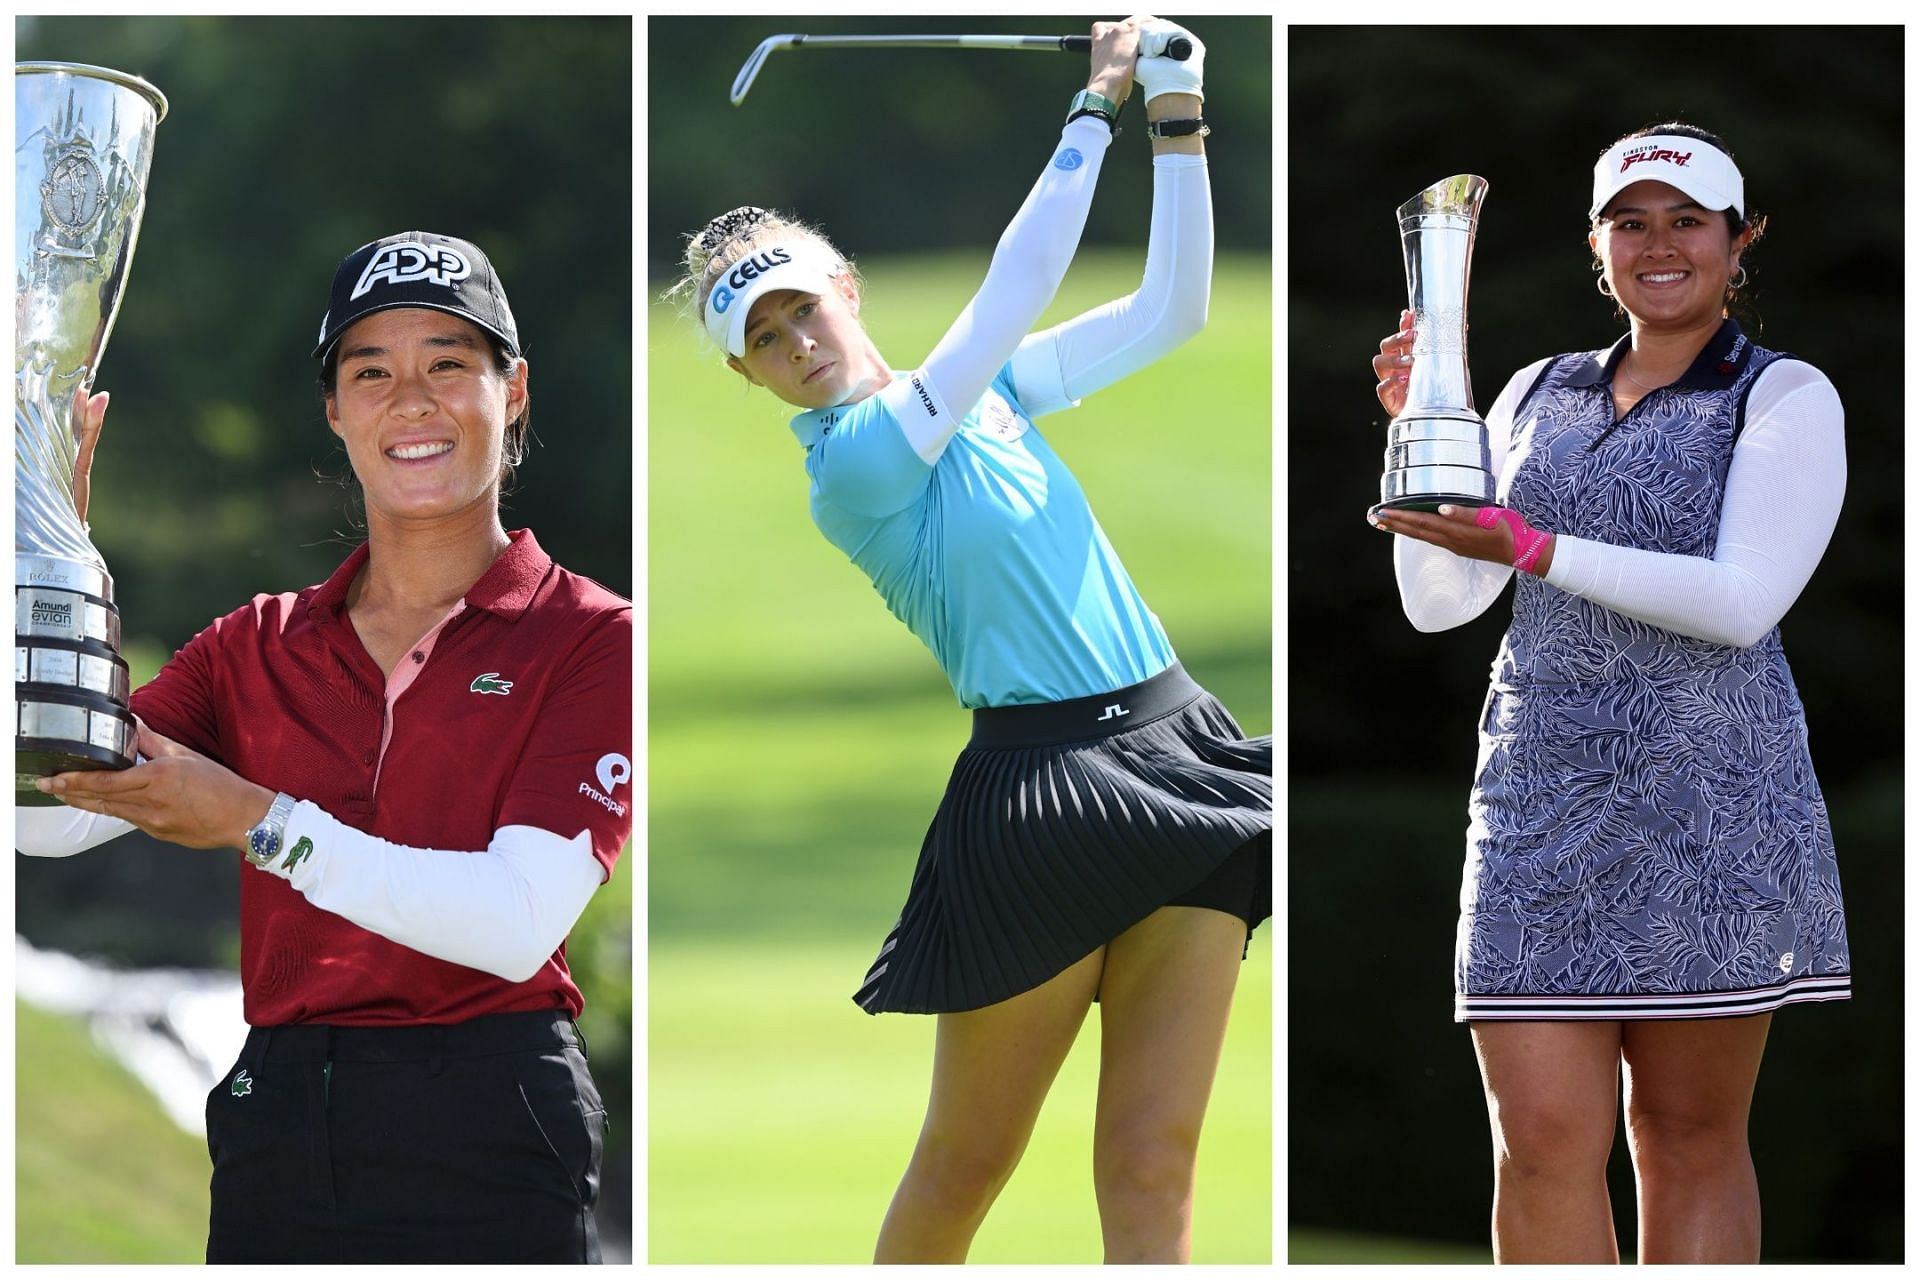 Celine Boutier, Nelly Korda and Lilia Vua are top names present at the 2023 CPKC women